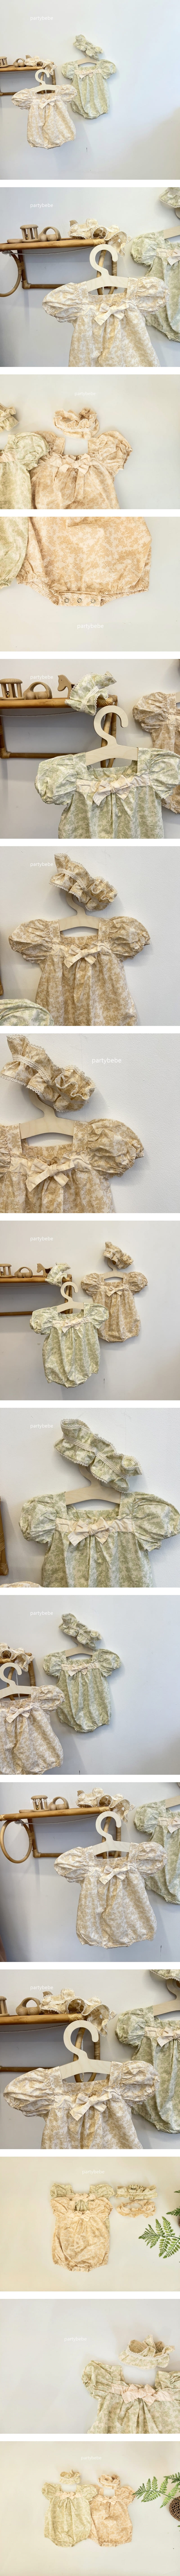 Party Kids - Korean Baby Fashion - #onlinebabyshop - Varnell Body Suit - 2